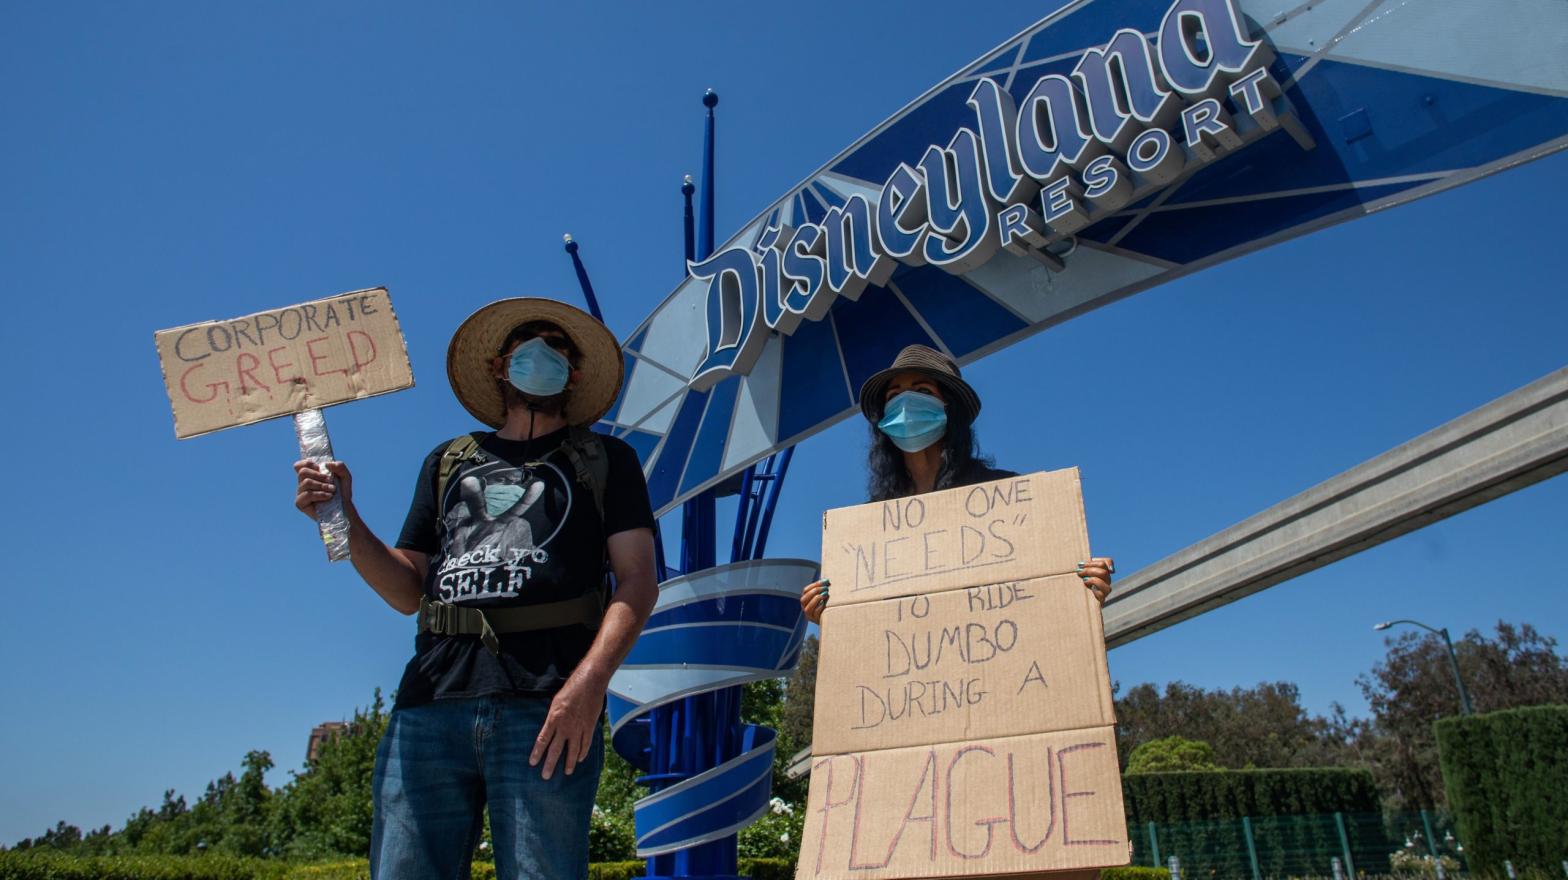 People holding signs in front of Anaheim's Disneyland as part of a cast member unions protest against reopening without on-demand covid-19 testing.  (Photo: Apu Gomes/AFP, Getty Images)